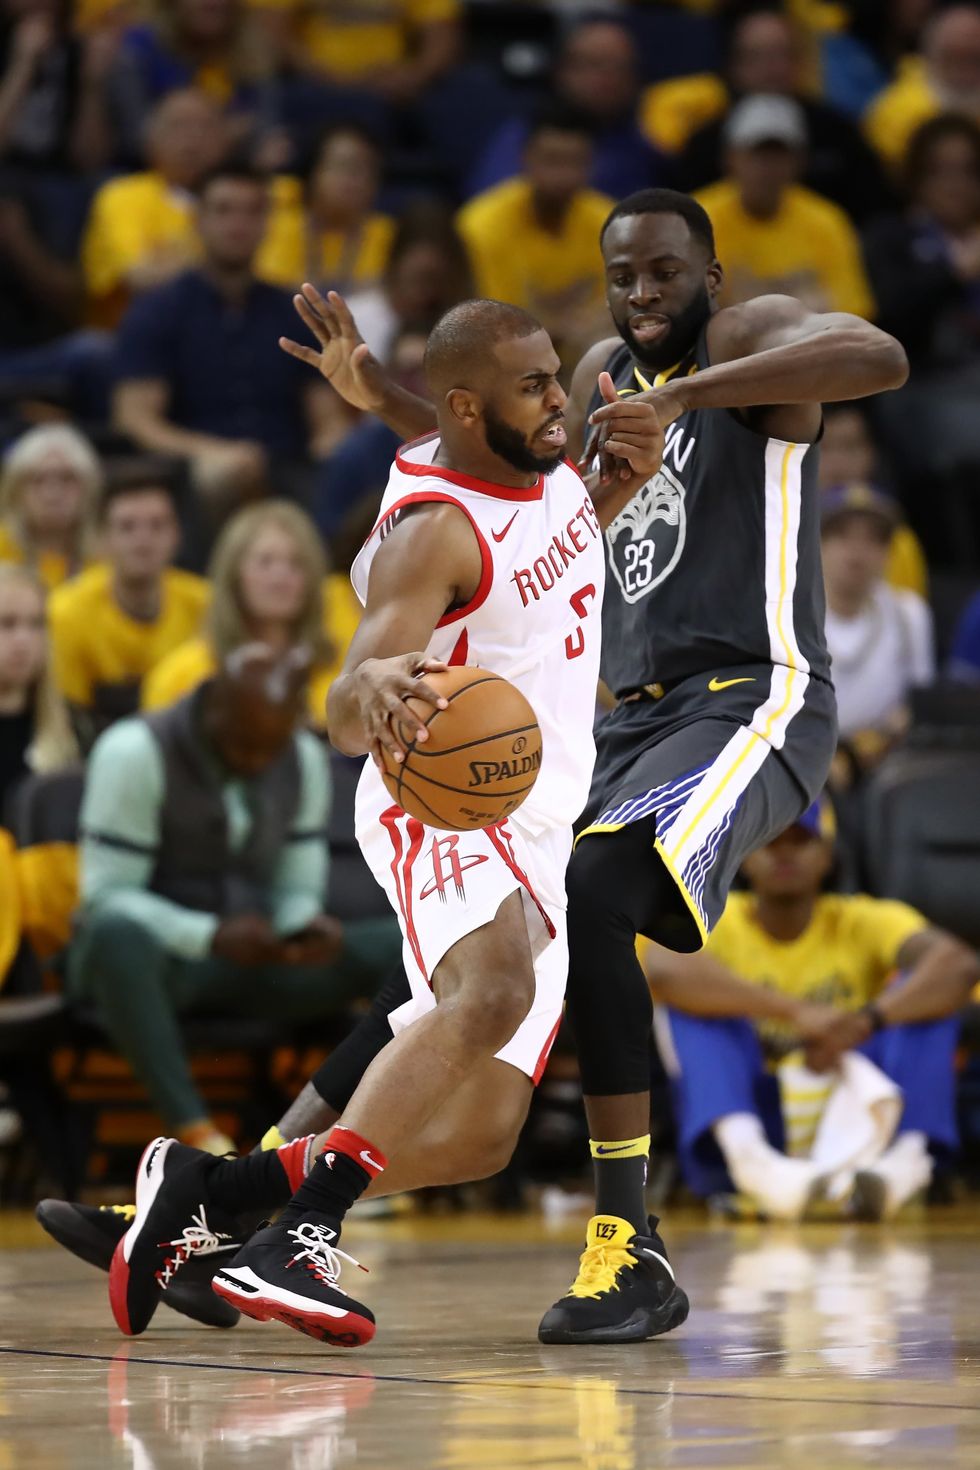 John Granato: Media Alert -- the Rockets won, and that is all that matters